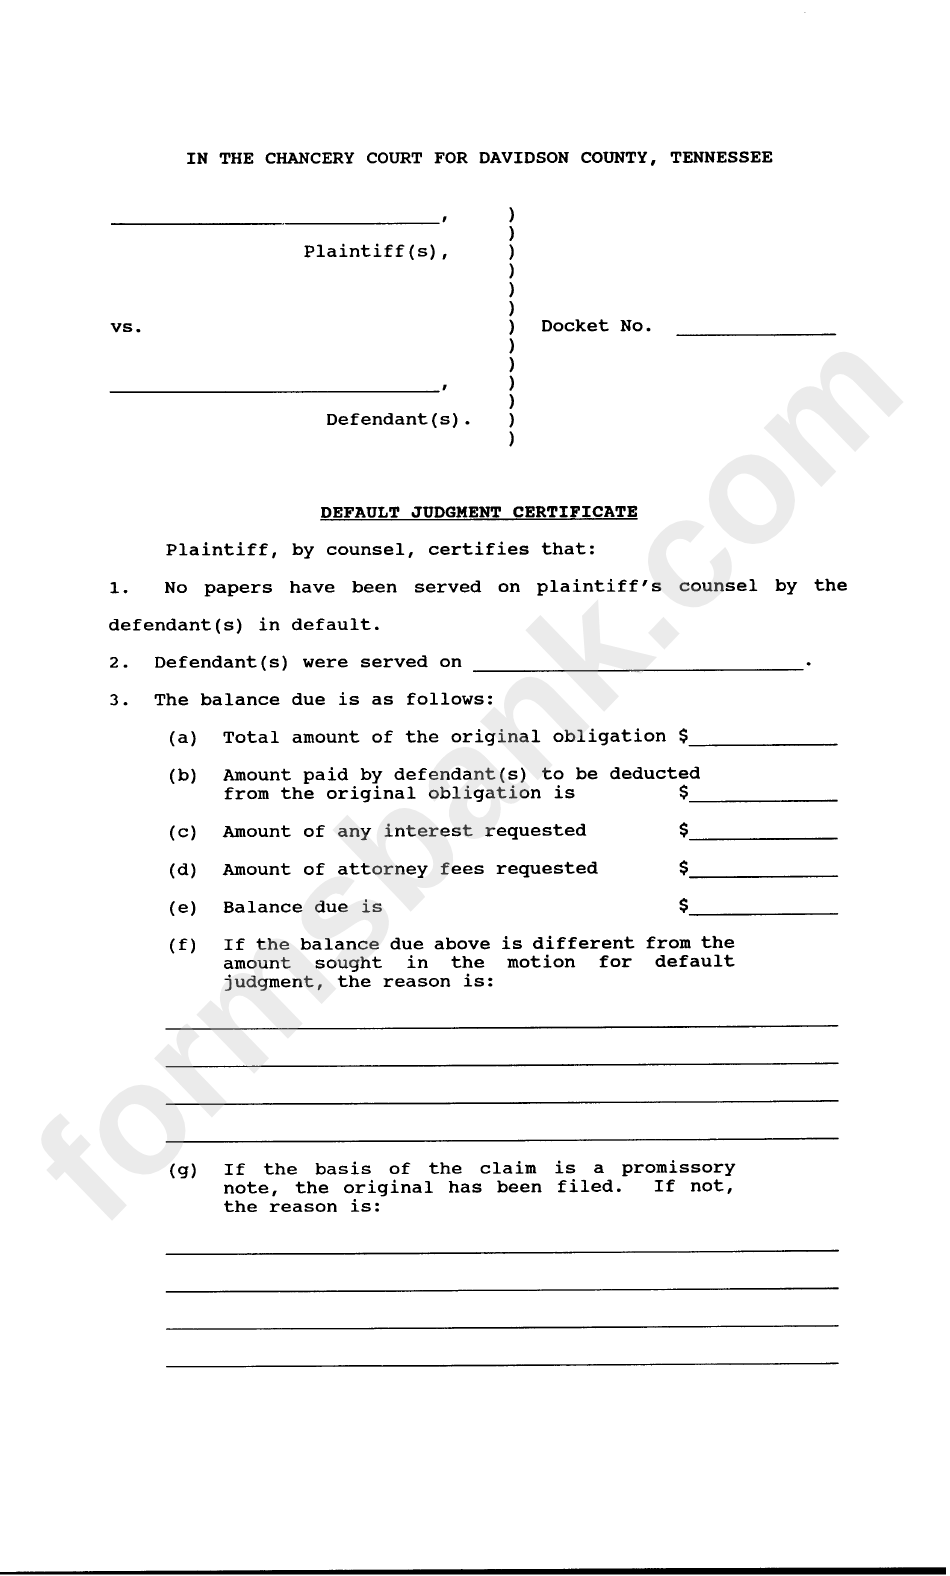 Default Judgment Certificate Form Davidson County, Tennessee